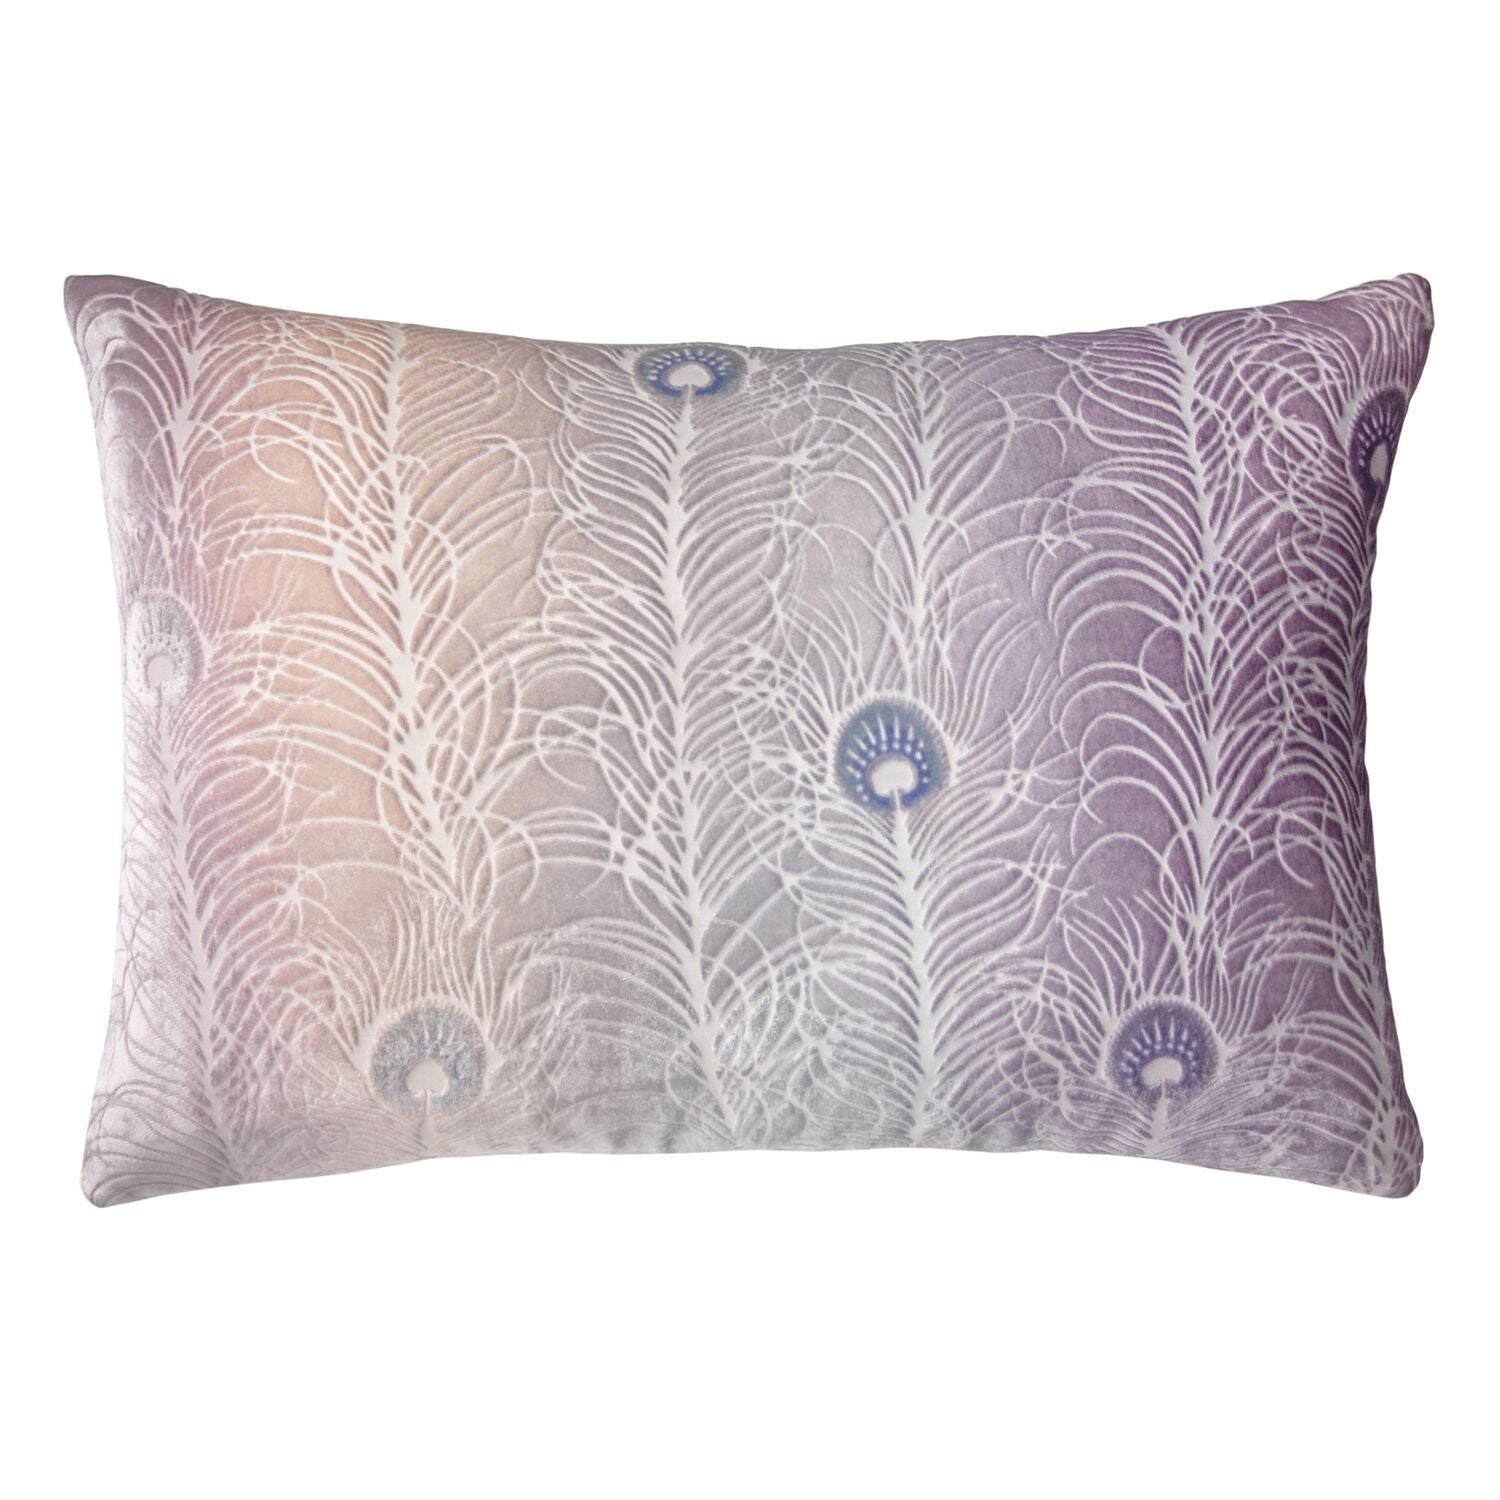 Prism Collection - Opal Peacock Feather Decorative Pillow by Kevin O'Brien Studio - Fig Linens